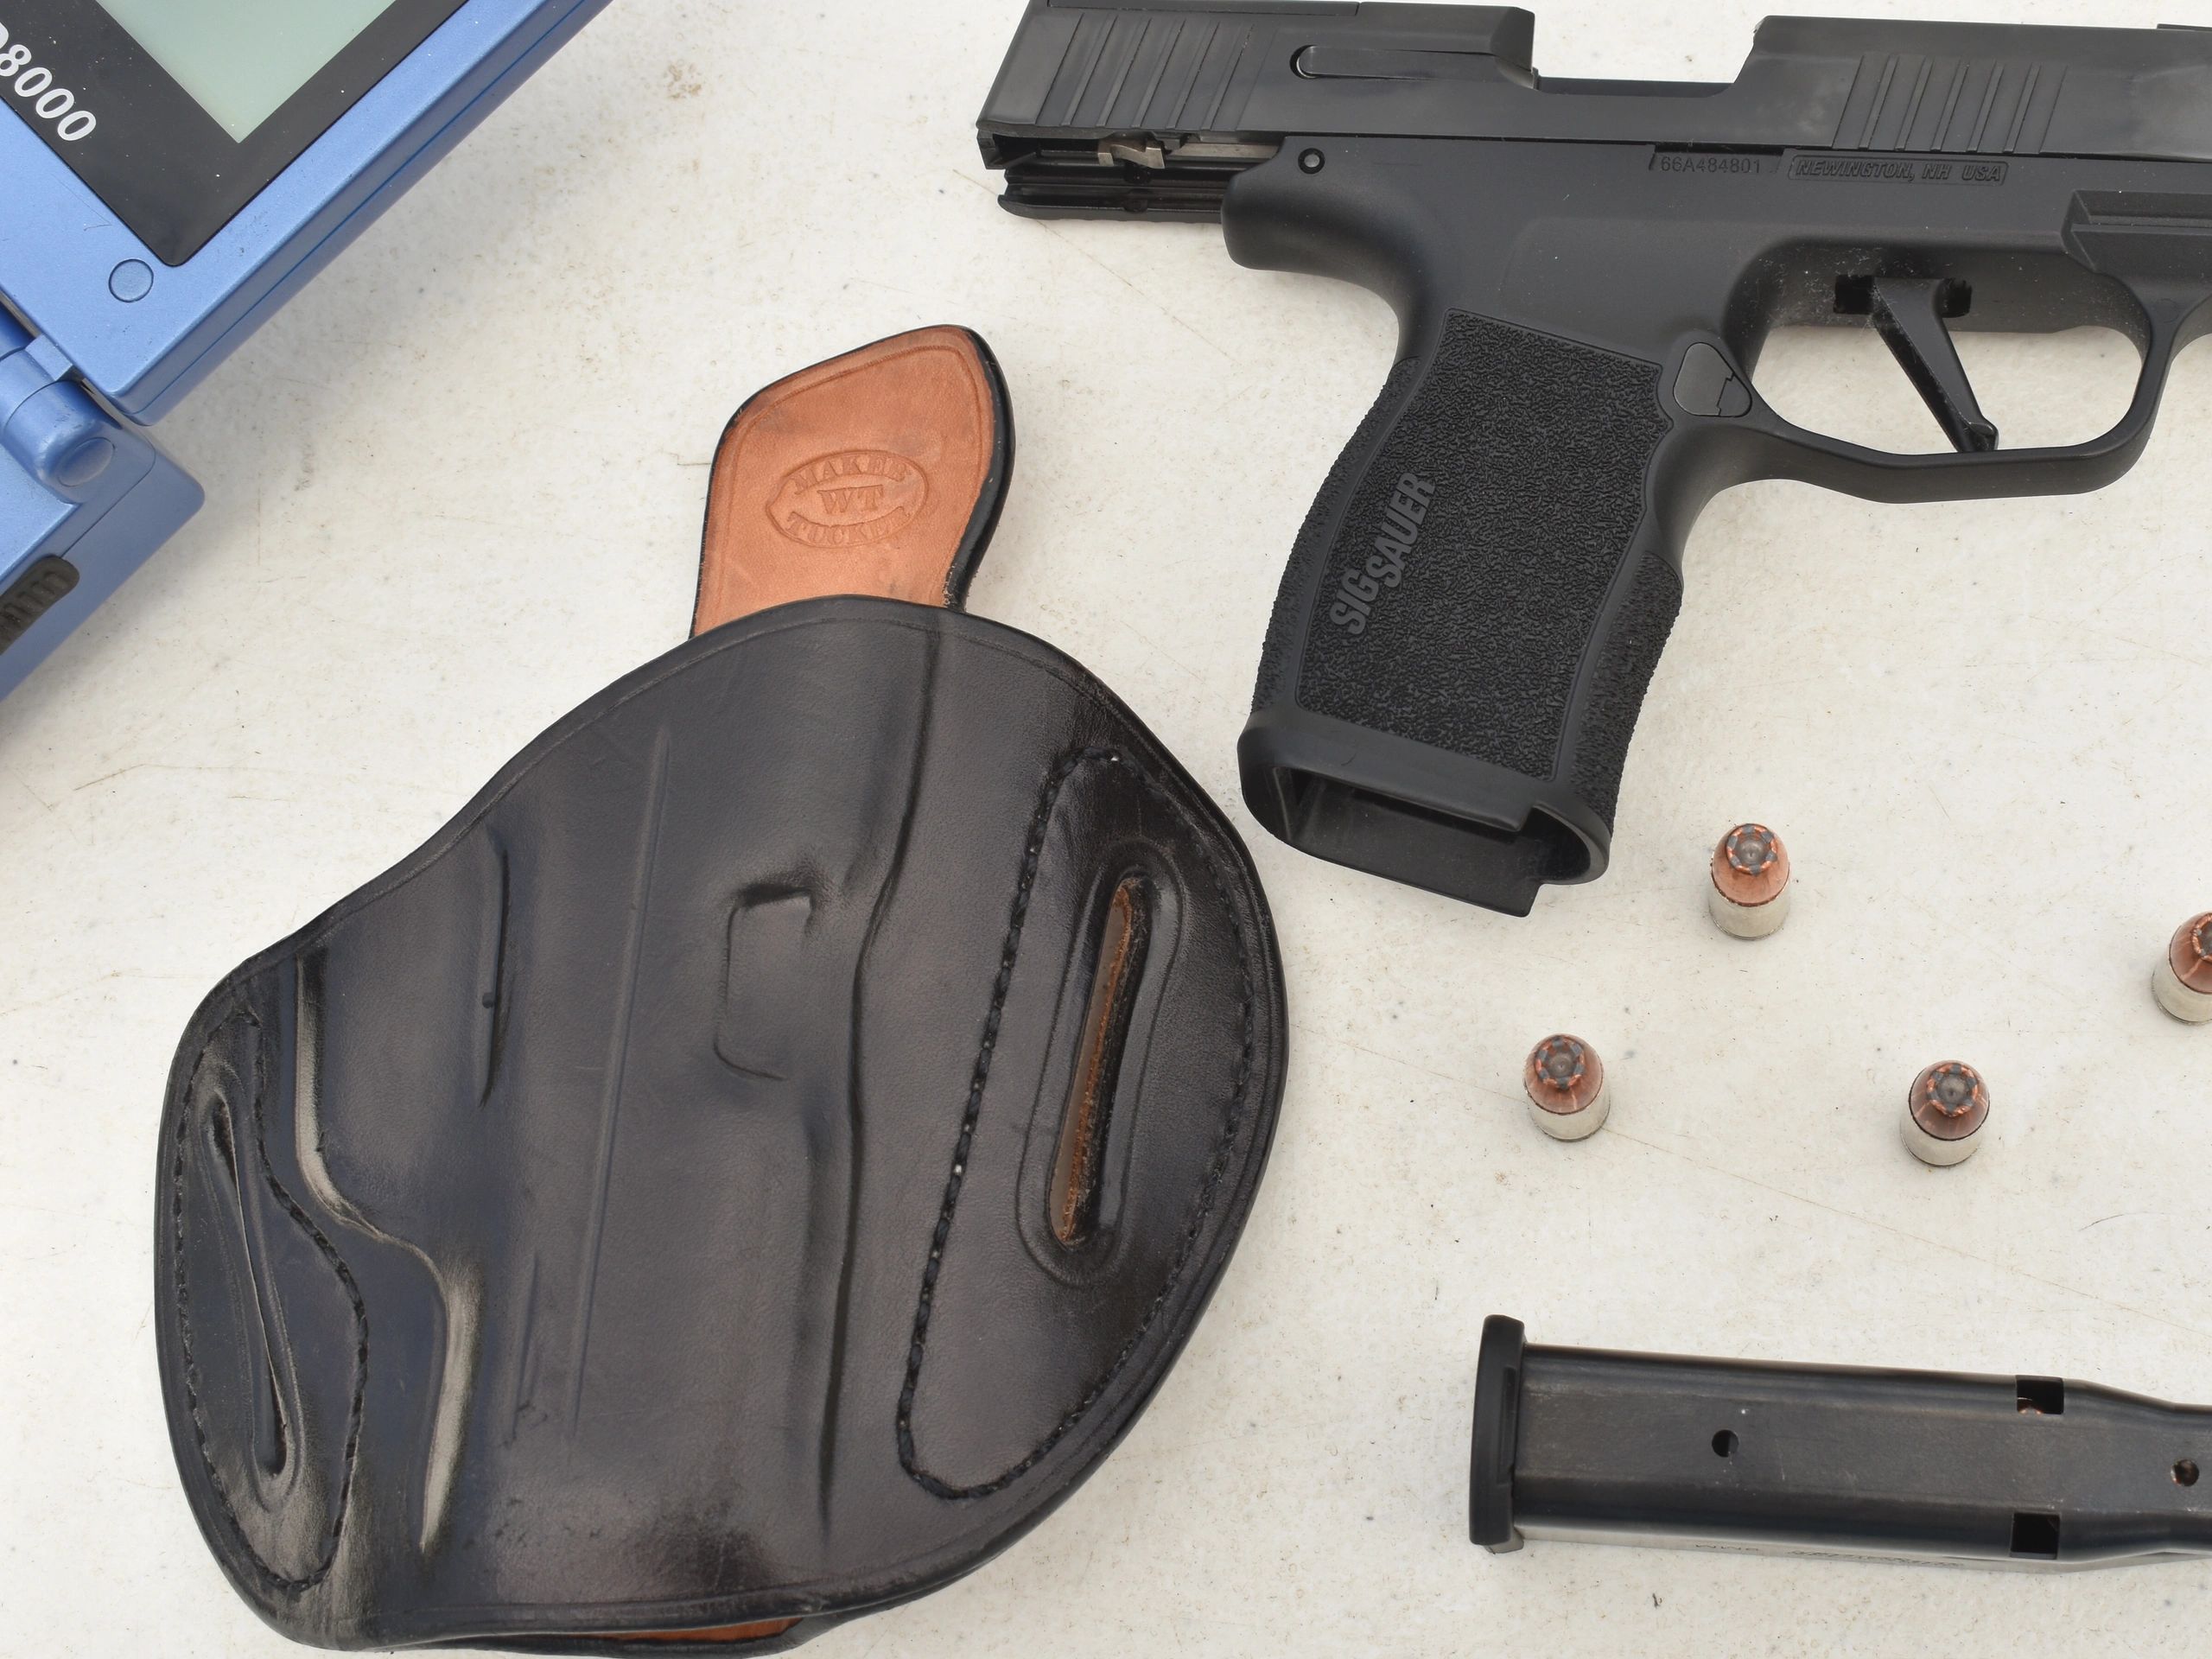 Self-defense Skills for Concealed Carry